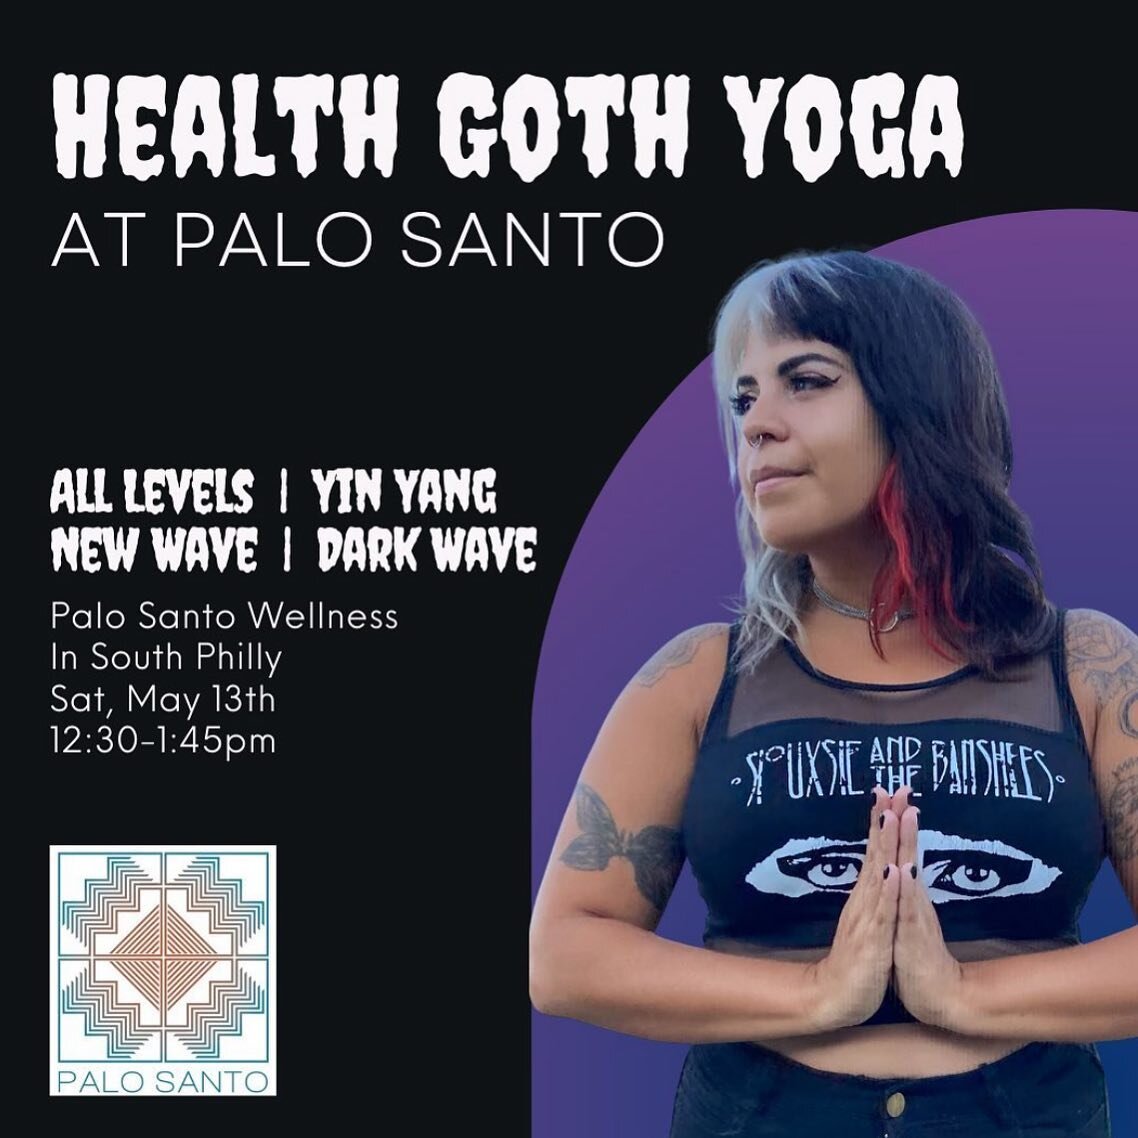 THIS SATURDAY!
MAY 13TH
12:30pm at Palo Santo in South Philly!

This will be a special 75 minute hip focused Yin Yang Flow that will balance the solar and lunar energies within us. It will be about 45 minutes yang and 30 minutes yin so expect to swea